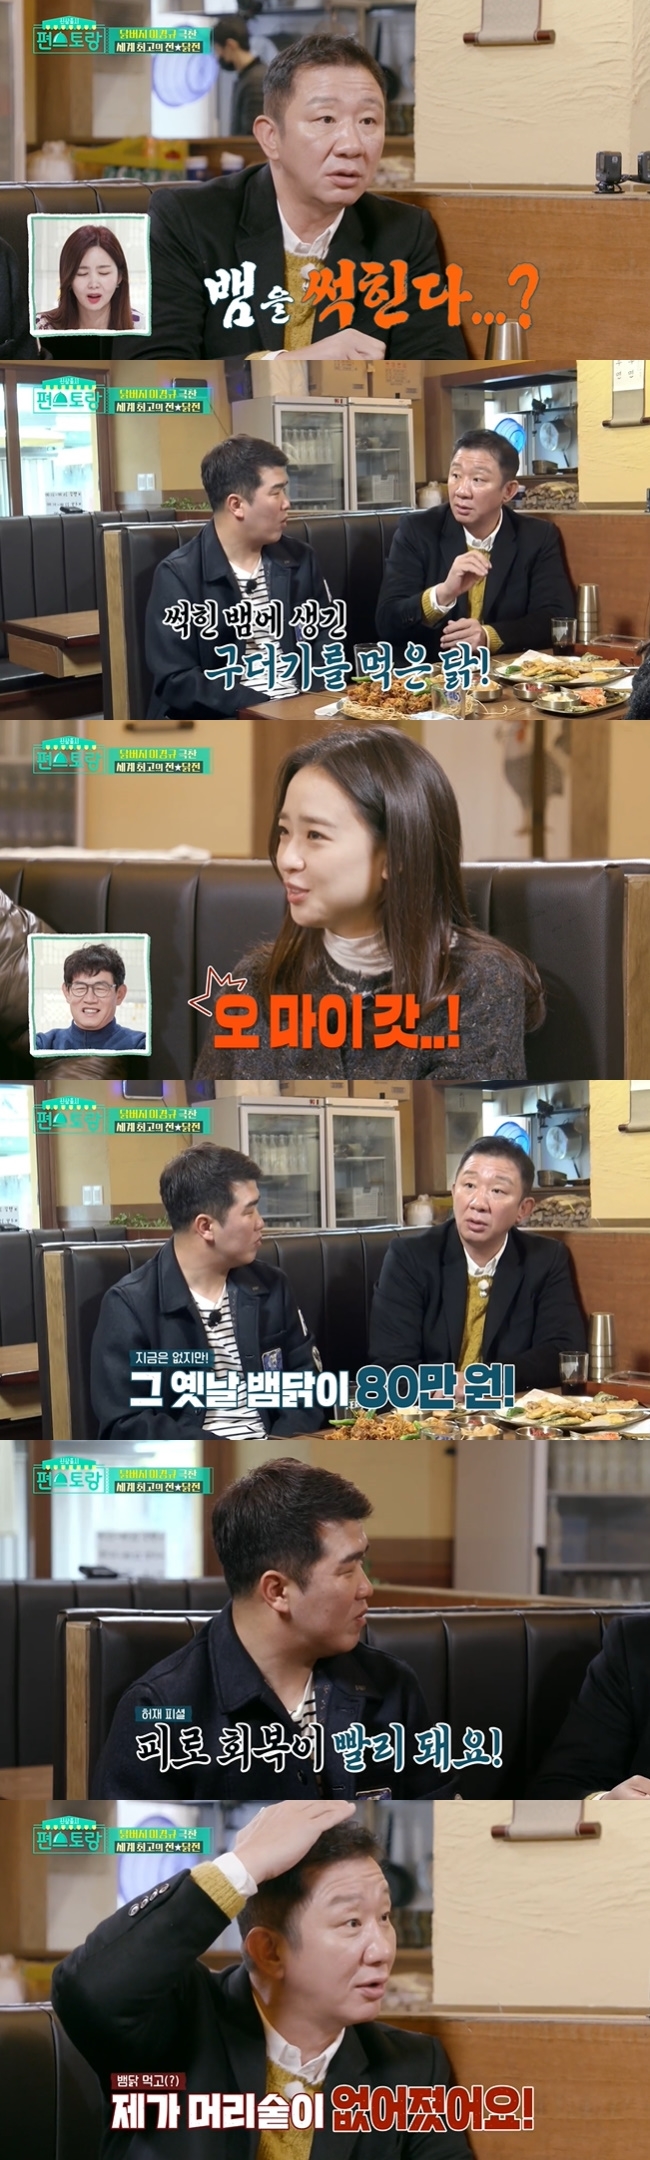 Hur Jae, a former basketball player, has revealed that he ate a snake chicken in the past.On KBS 2TV Stars Top Recipe at Fun-Staurant broadcast on March 4, Lee Kyung-kyu, Hur Jae, Son Yeon-jae and Jung Geun-woo gathered in one place to eat various chicken dishes.Hur Jae said, I have seen it for a long time. I saw it in serial high school. And I am close to Woong and Hoon.When Lee Kyung-kyu praised the series came at our daughters wedding, Hur Jae said, I do not say why my brother came.The four of them ate chickens and chickens with rice. Then Hur Jae said, I really like chickens.I can not eat now, but when I was a child, there was a snake chicken in a recreational style. If you go to the country, you do not feed the snake to the chicken, but you rot the snake.If a snake has maggots, the chicken pecks them off, and the chicken that has eaten them has no chickens, he explained.When Son Yeon-jae asked, Hows the taste? Hur Jae surprised everyone by saying, Its delicious, its really succumbing, but its a bit expensive, I wanted 800,000 won for one.